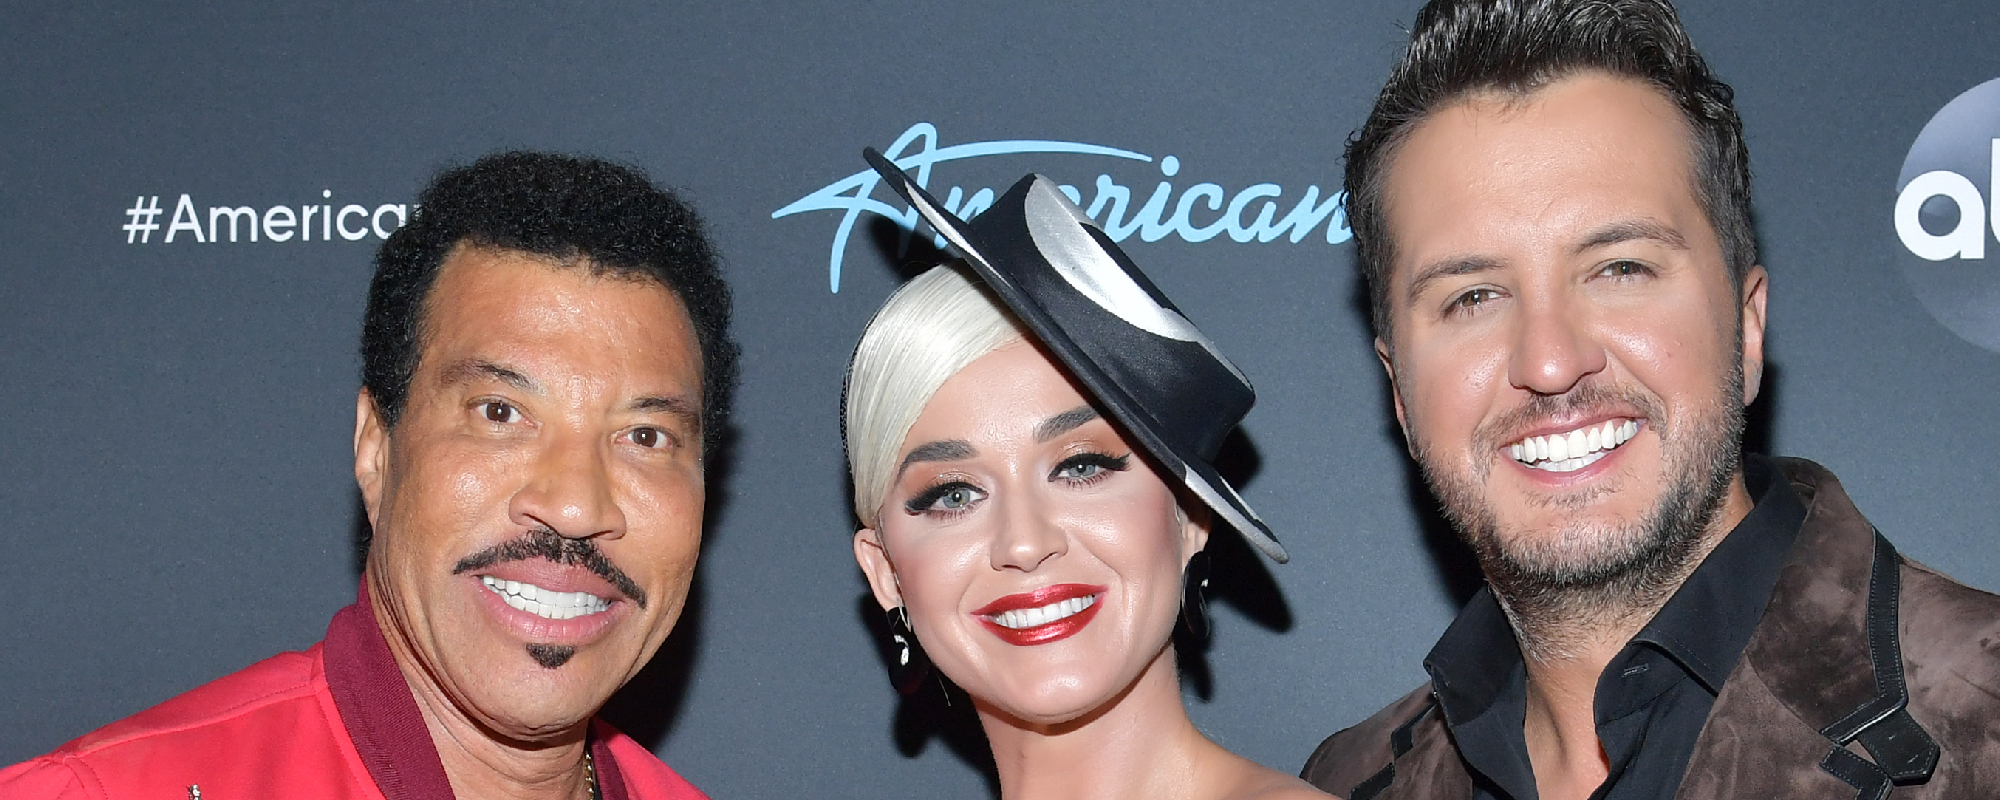 Lionel Richie Frightened by Katy Perry’s ‘American Idol’ Exit, Luke Bryan Weighs in on Her Emotional Departure